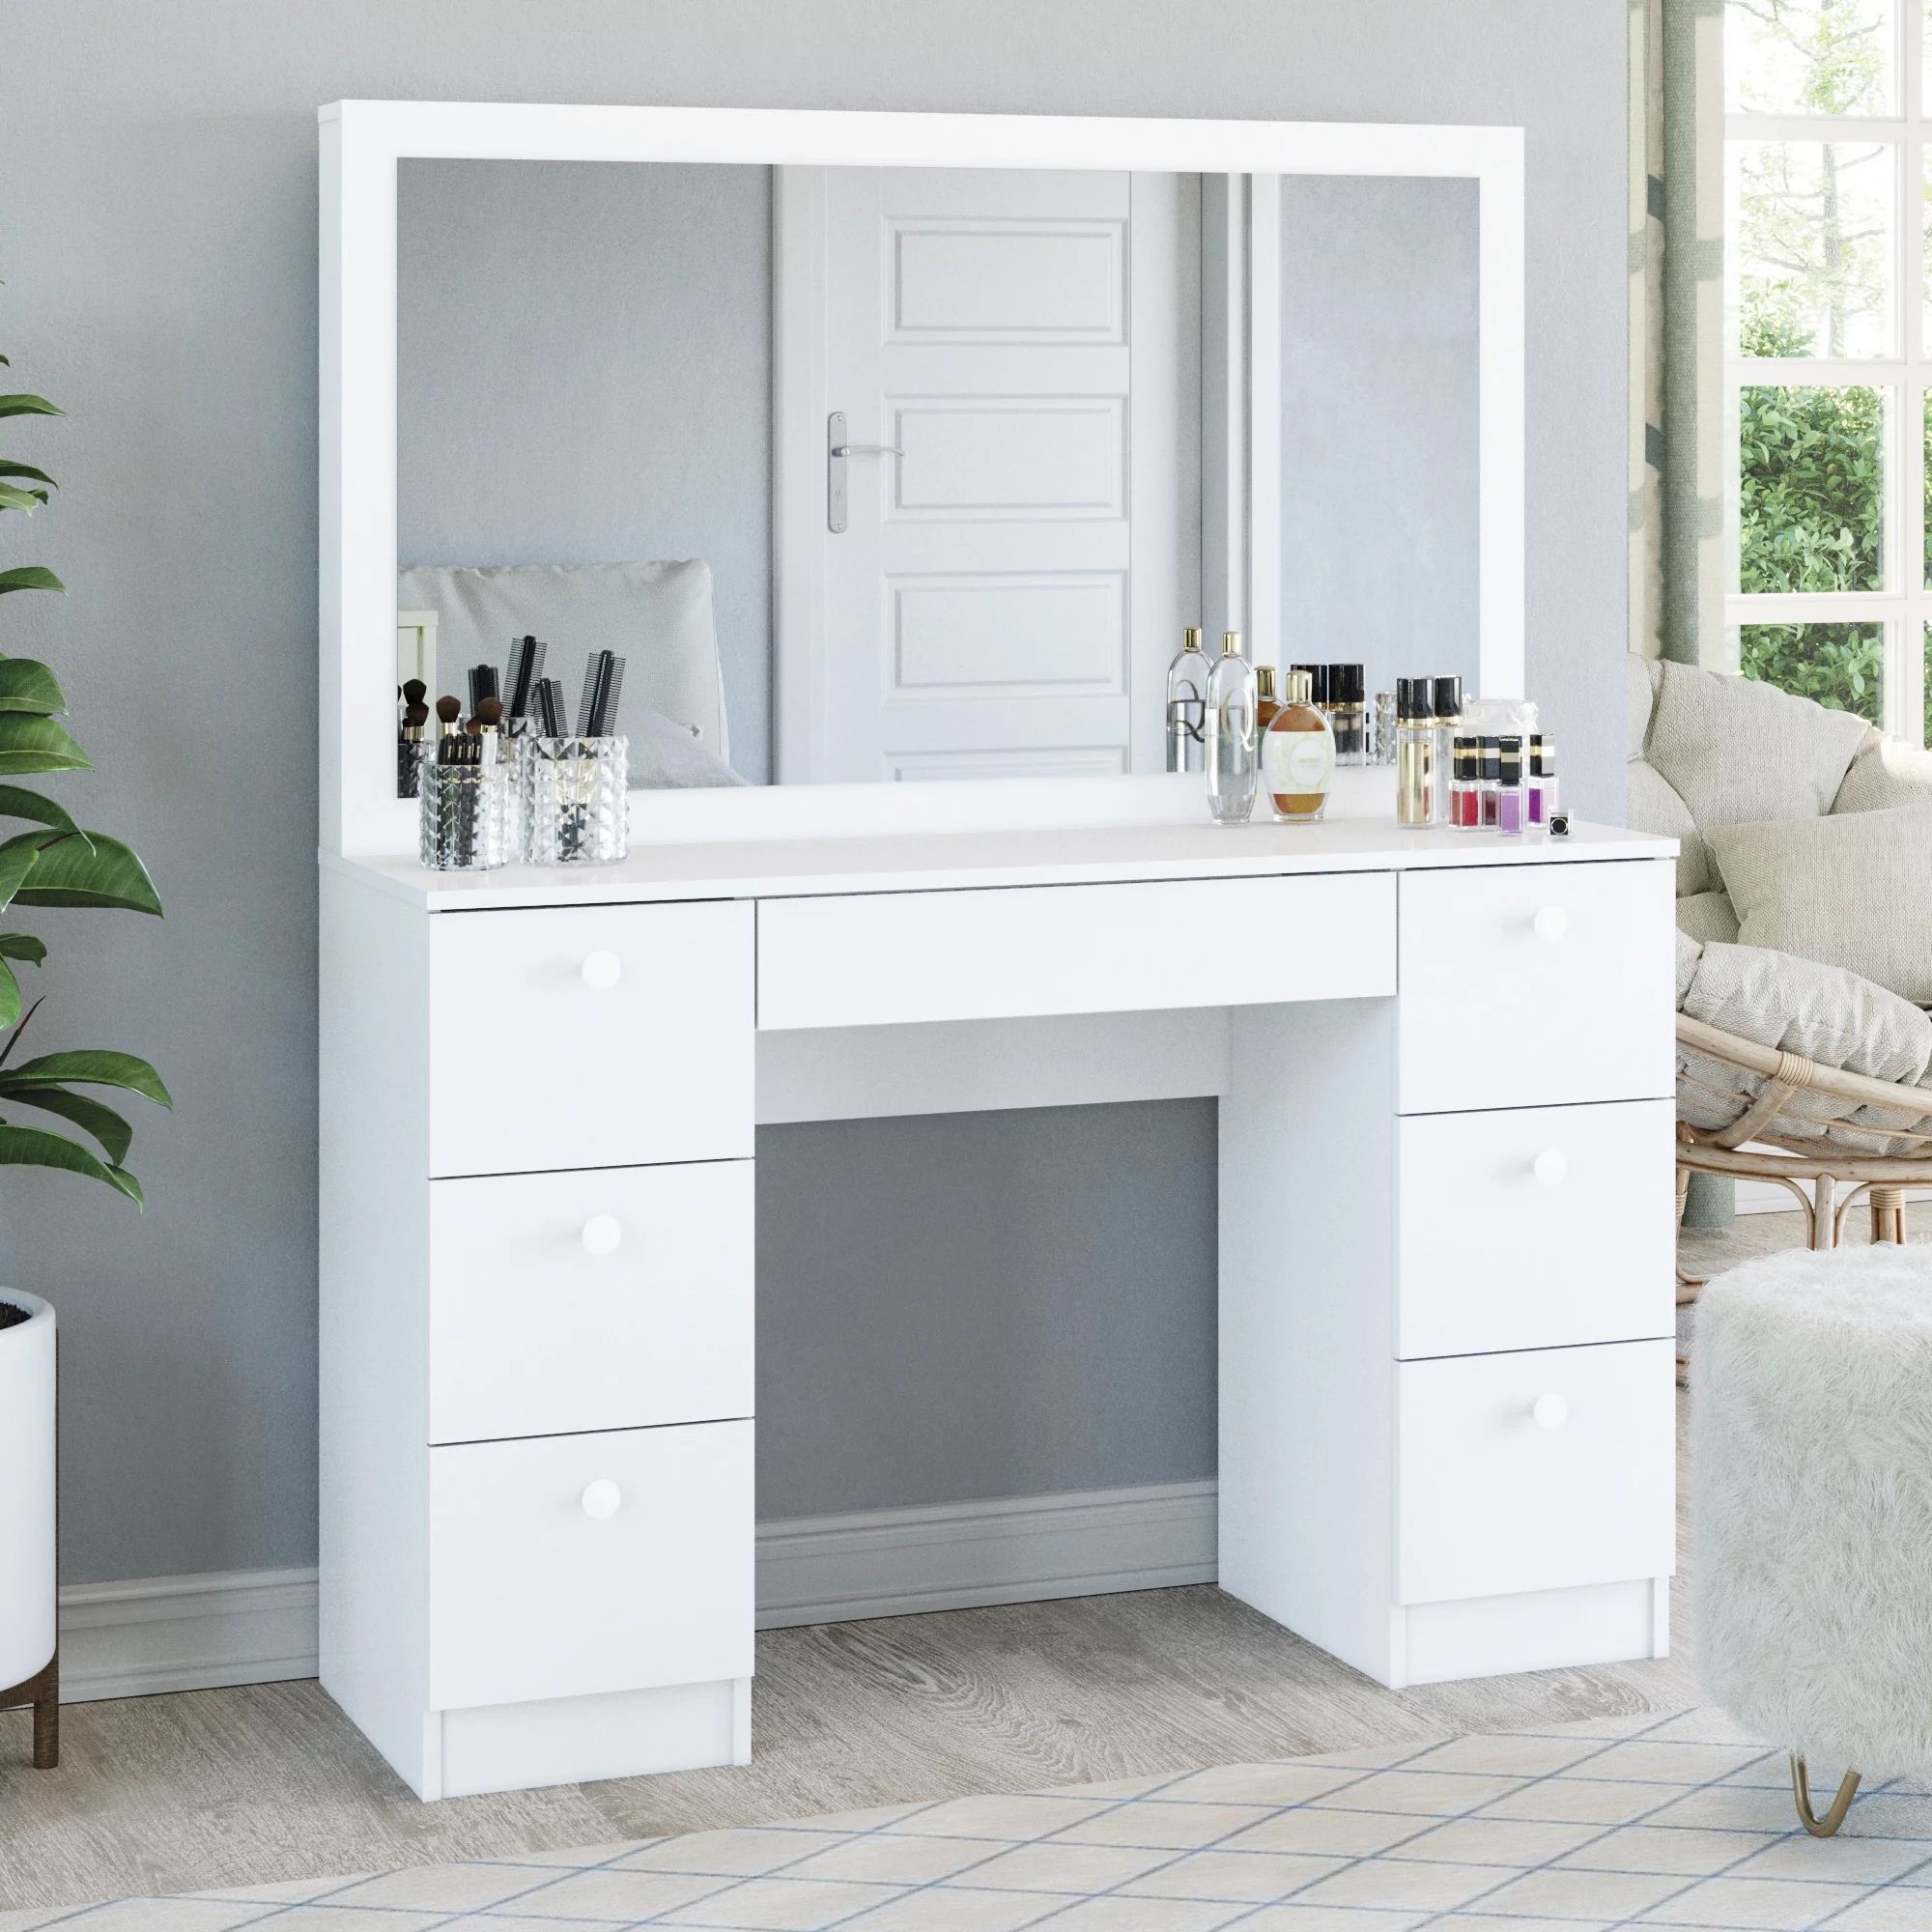 Boahaus Artemisia Modern Vanity Table with Mirror and 7 Drawers, White finish | Walmart (US)